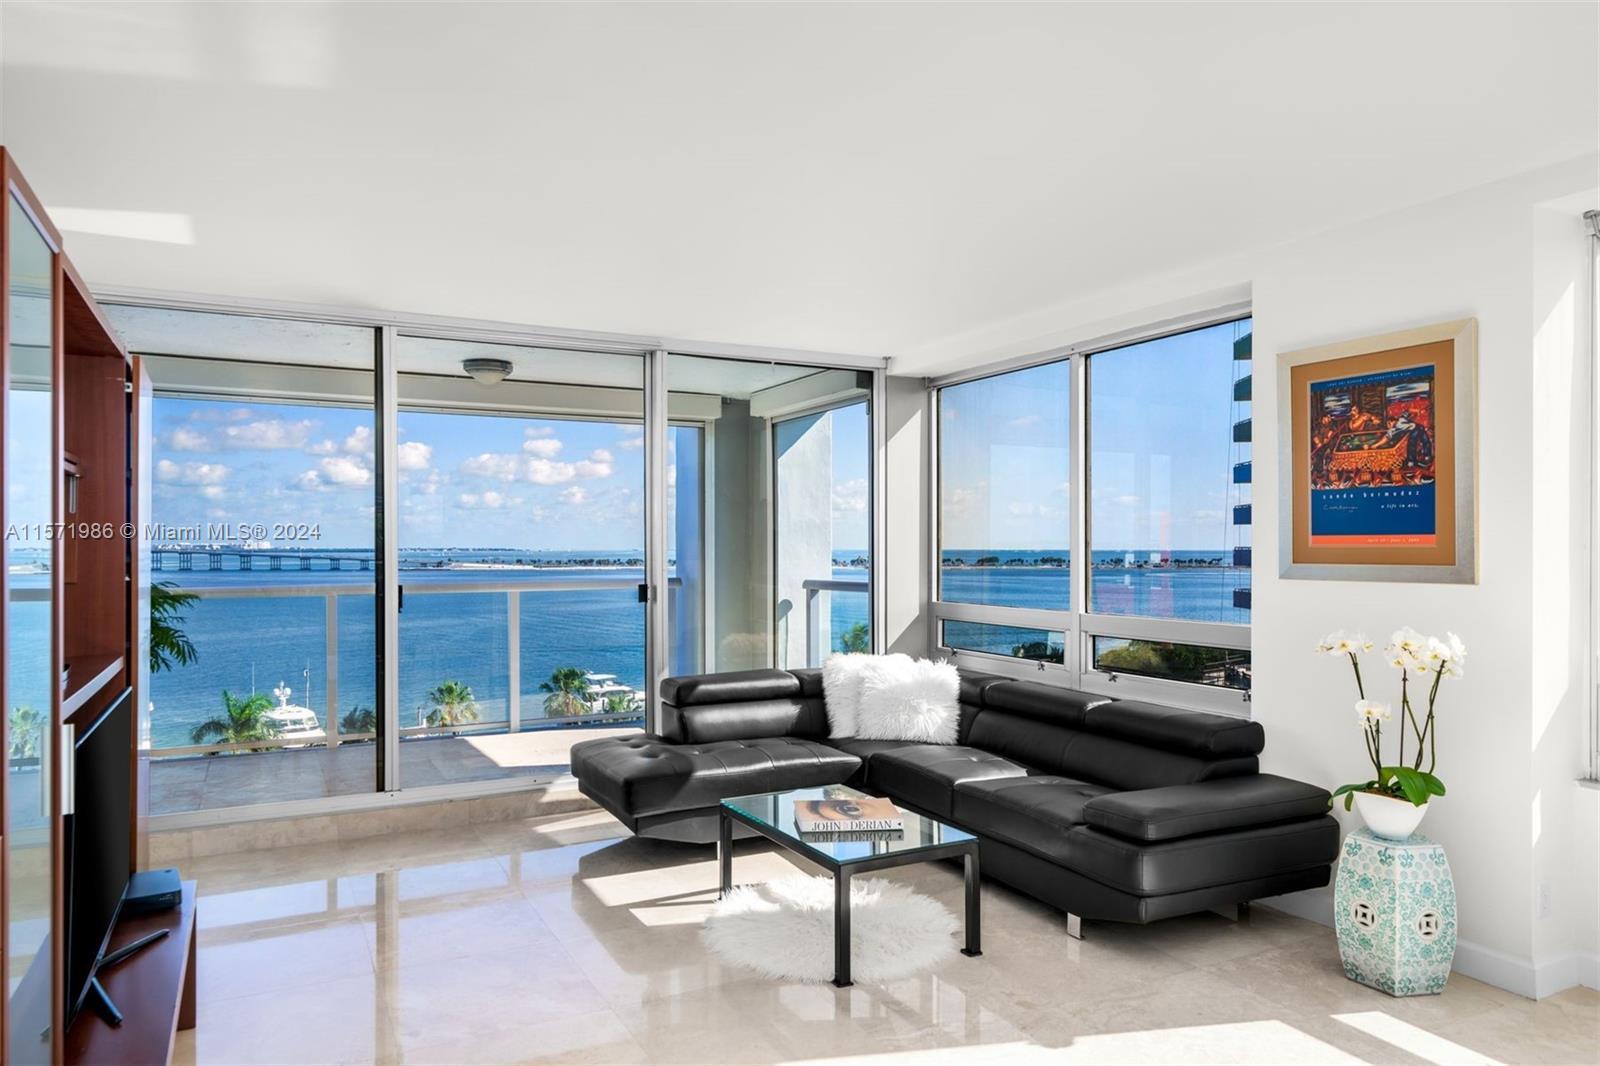 This coveted 01 Line 2/2 at the Palace Brickell showcases dynamic 8th floor Bay & Skyline views. Mod